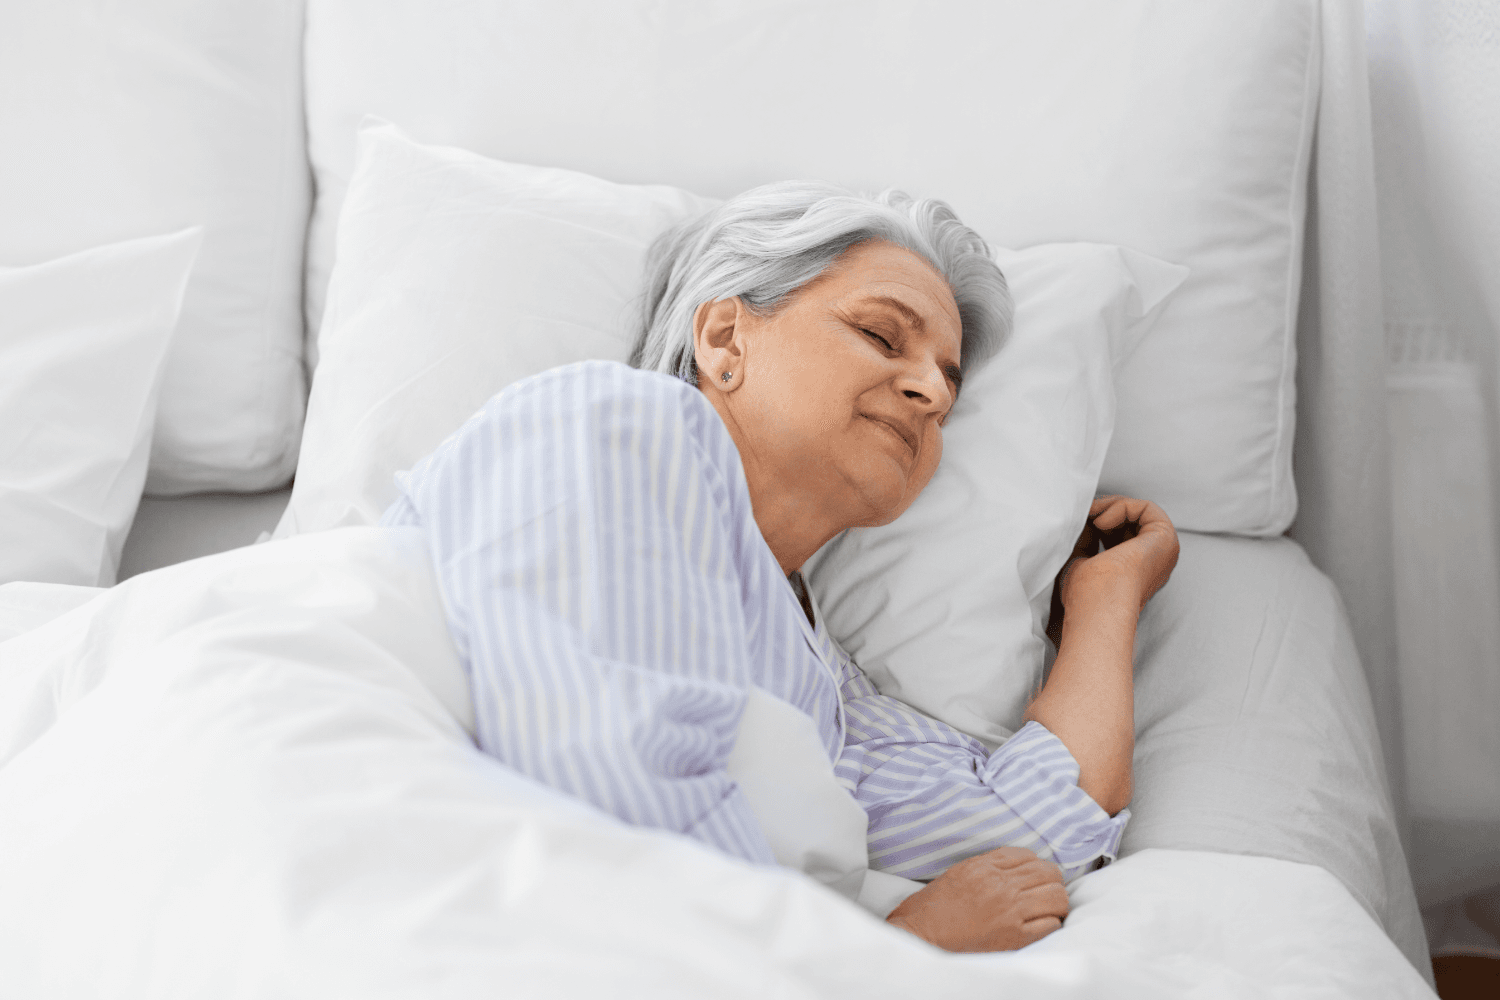 woman sleeping in bed with white sheets and wearing a blue shirt